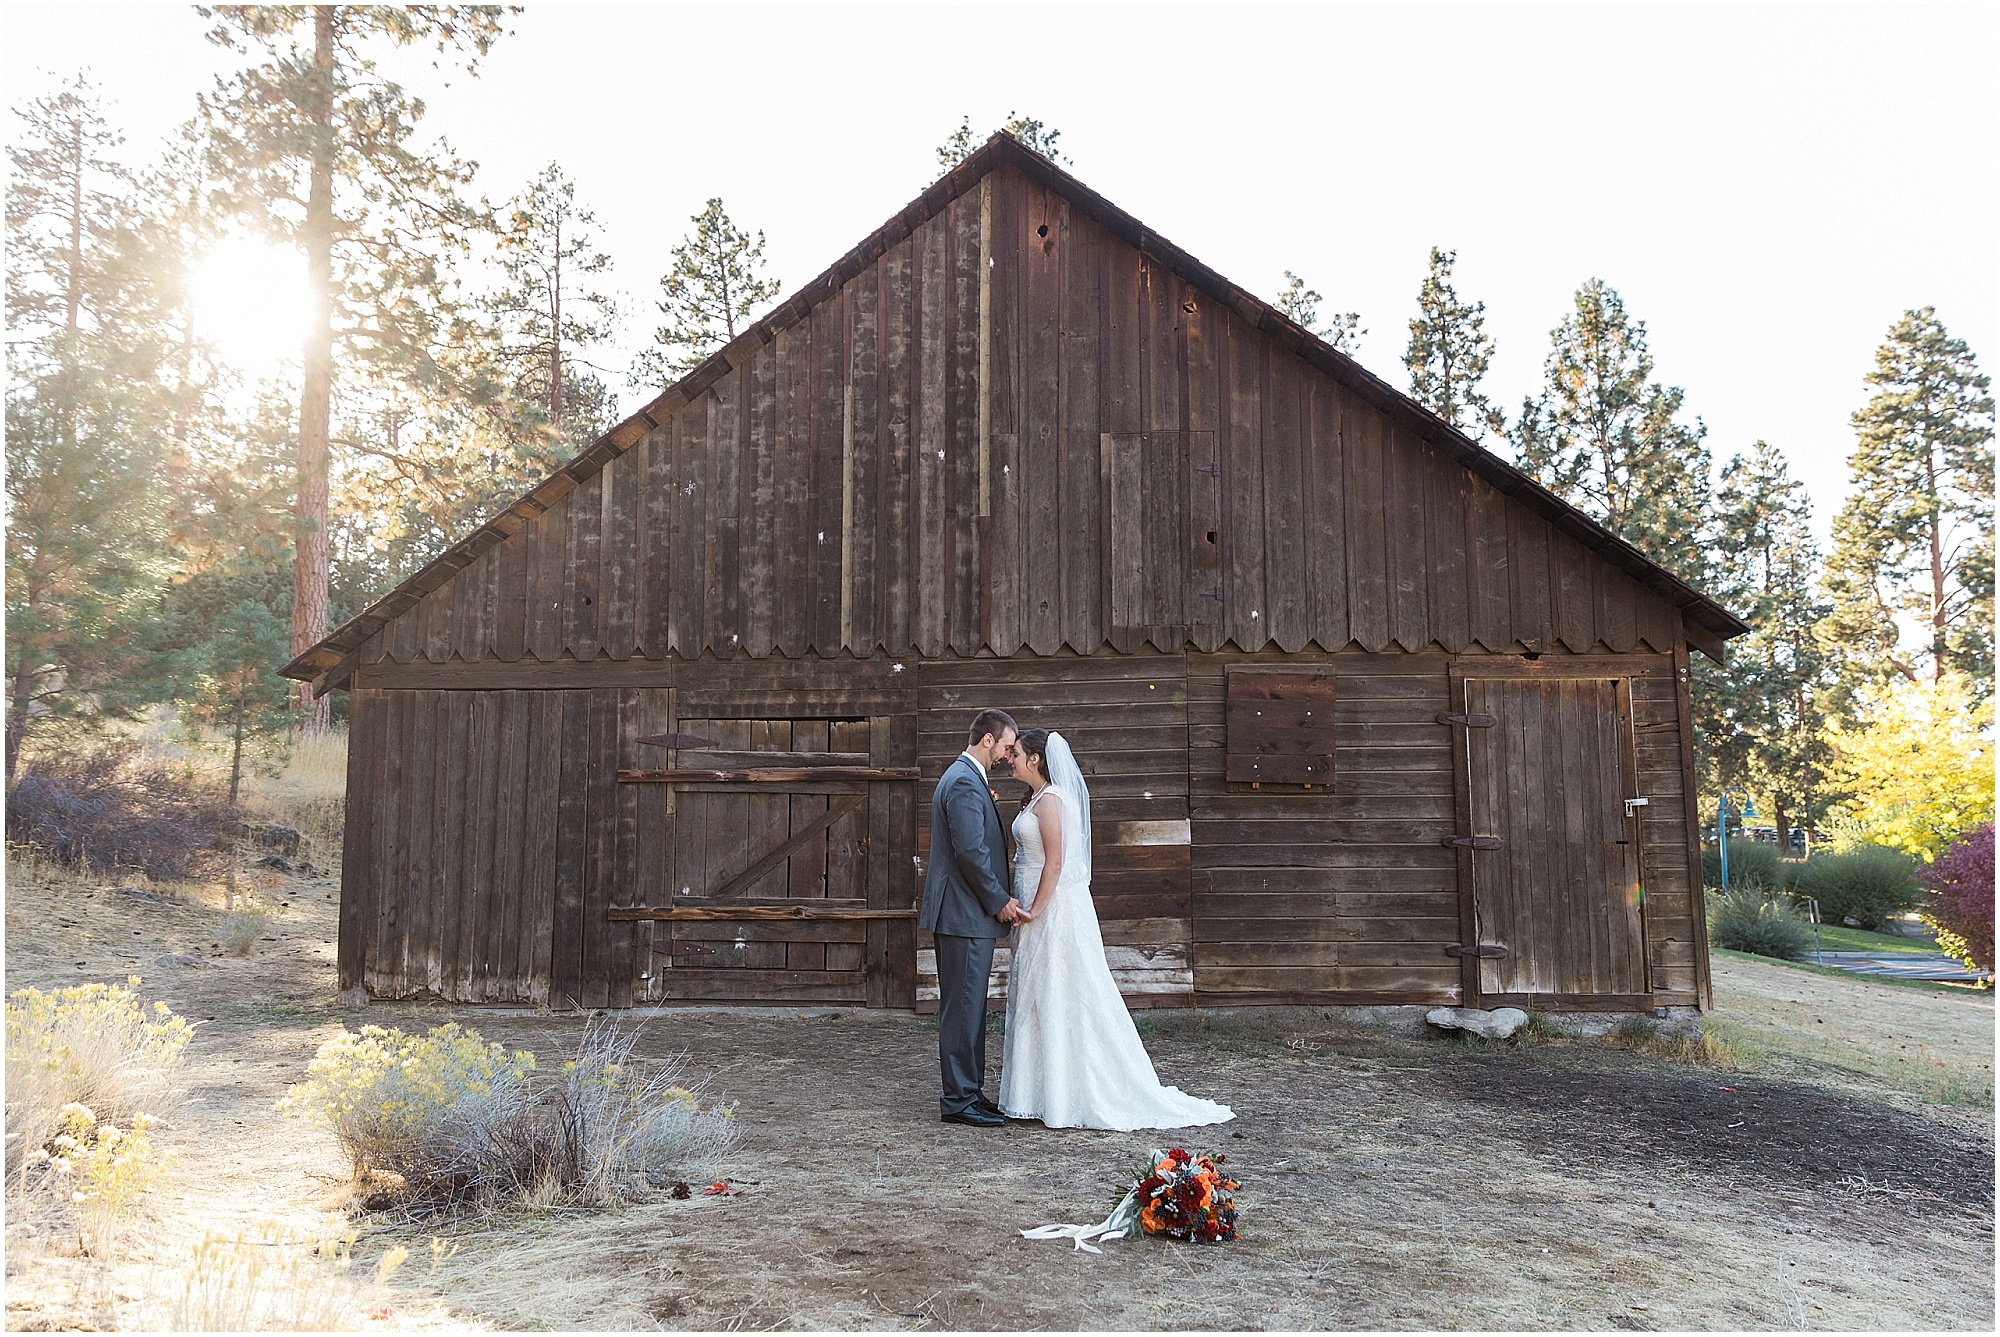 Newlyweds pose in front of the rustic barn at their wedding in Bend, Oregon's Hollinshead Park for their Hollinshead Barn fall wedding. | Erica Swantek Swantek